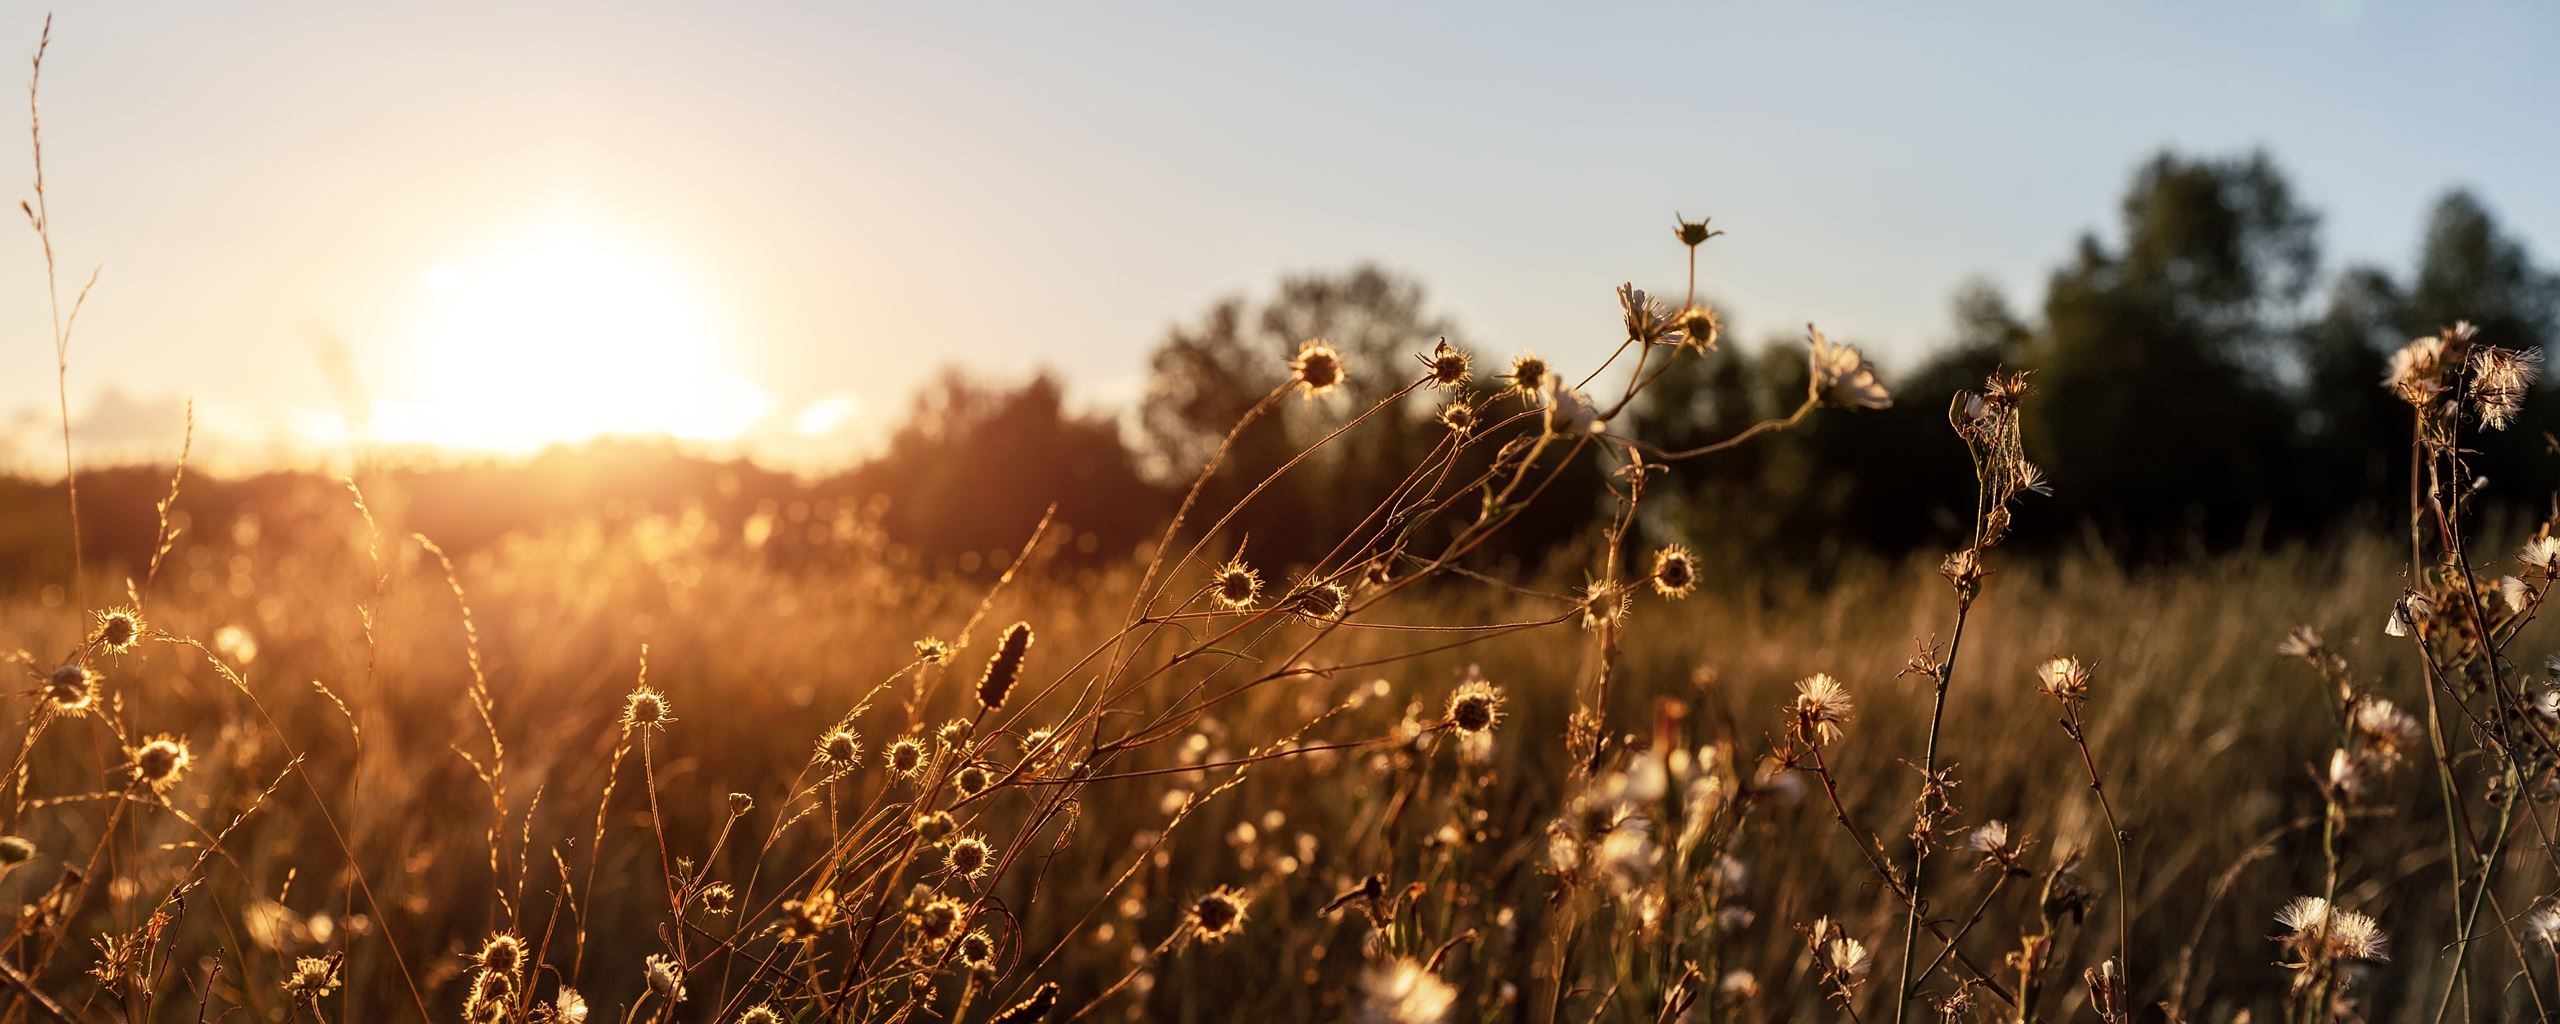 arm landscape of dry wildflower and grass meadow on warm golden hour sunset or sunrise time